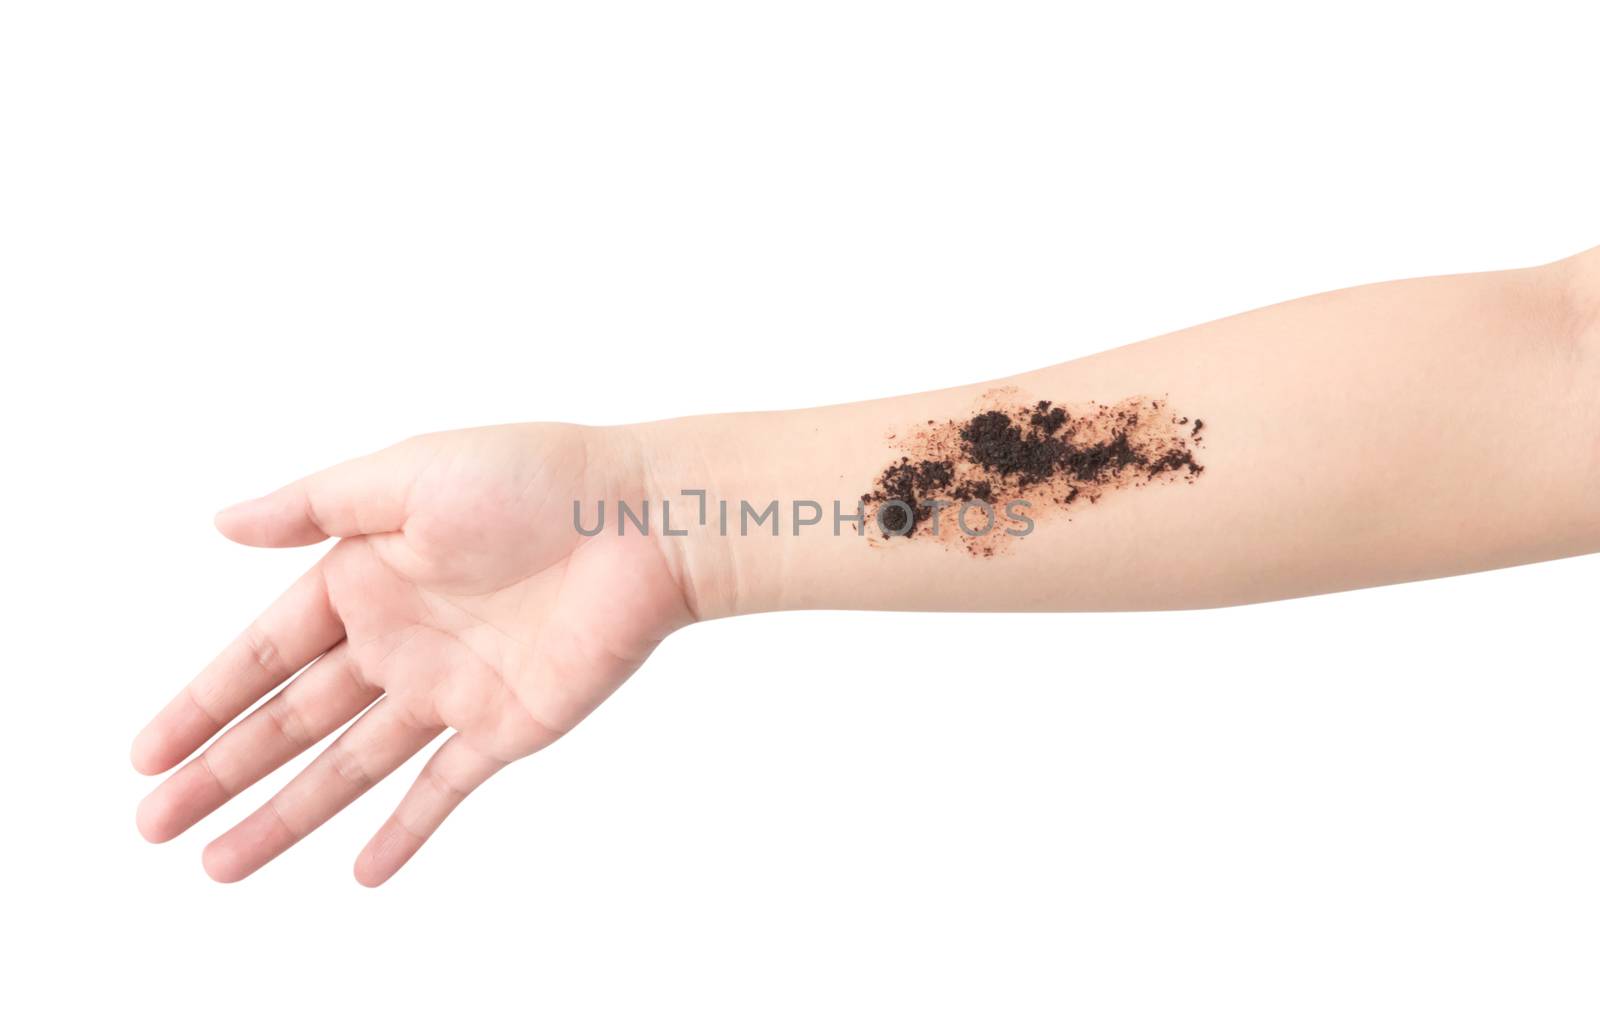 Woman's hand with scrub coffee grounds on skin hand and arm, bea by pt.pongsak@gmail.com